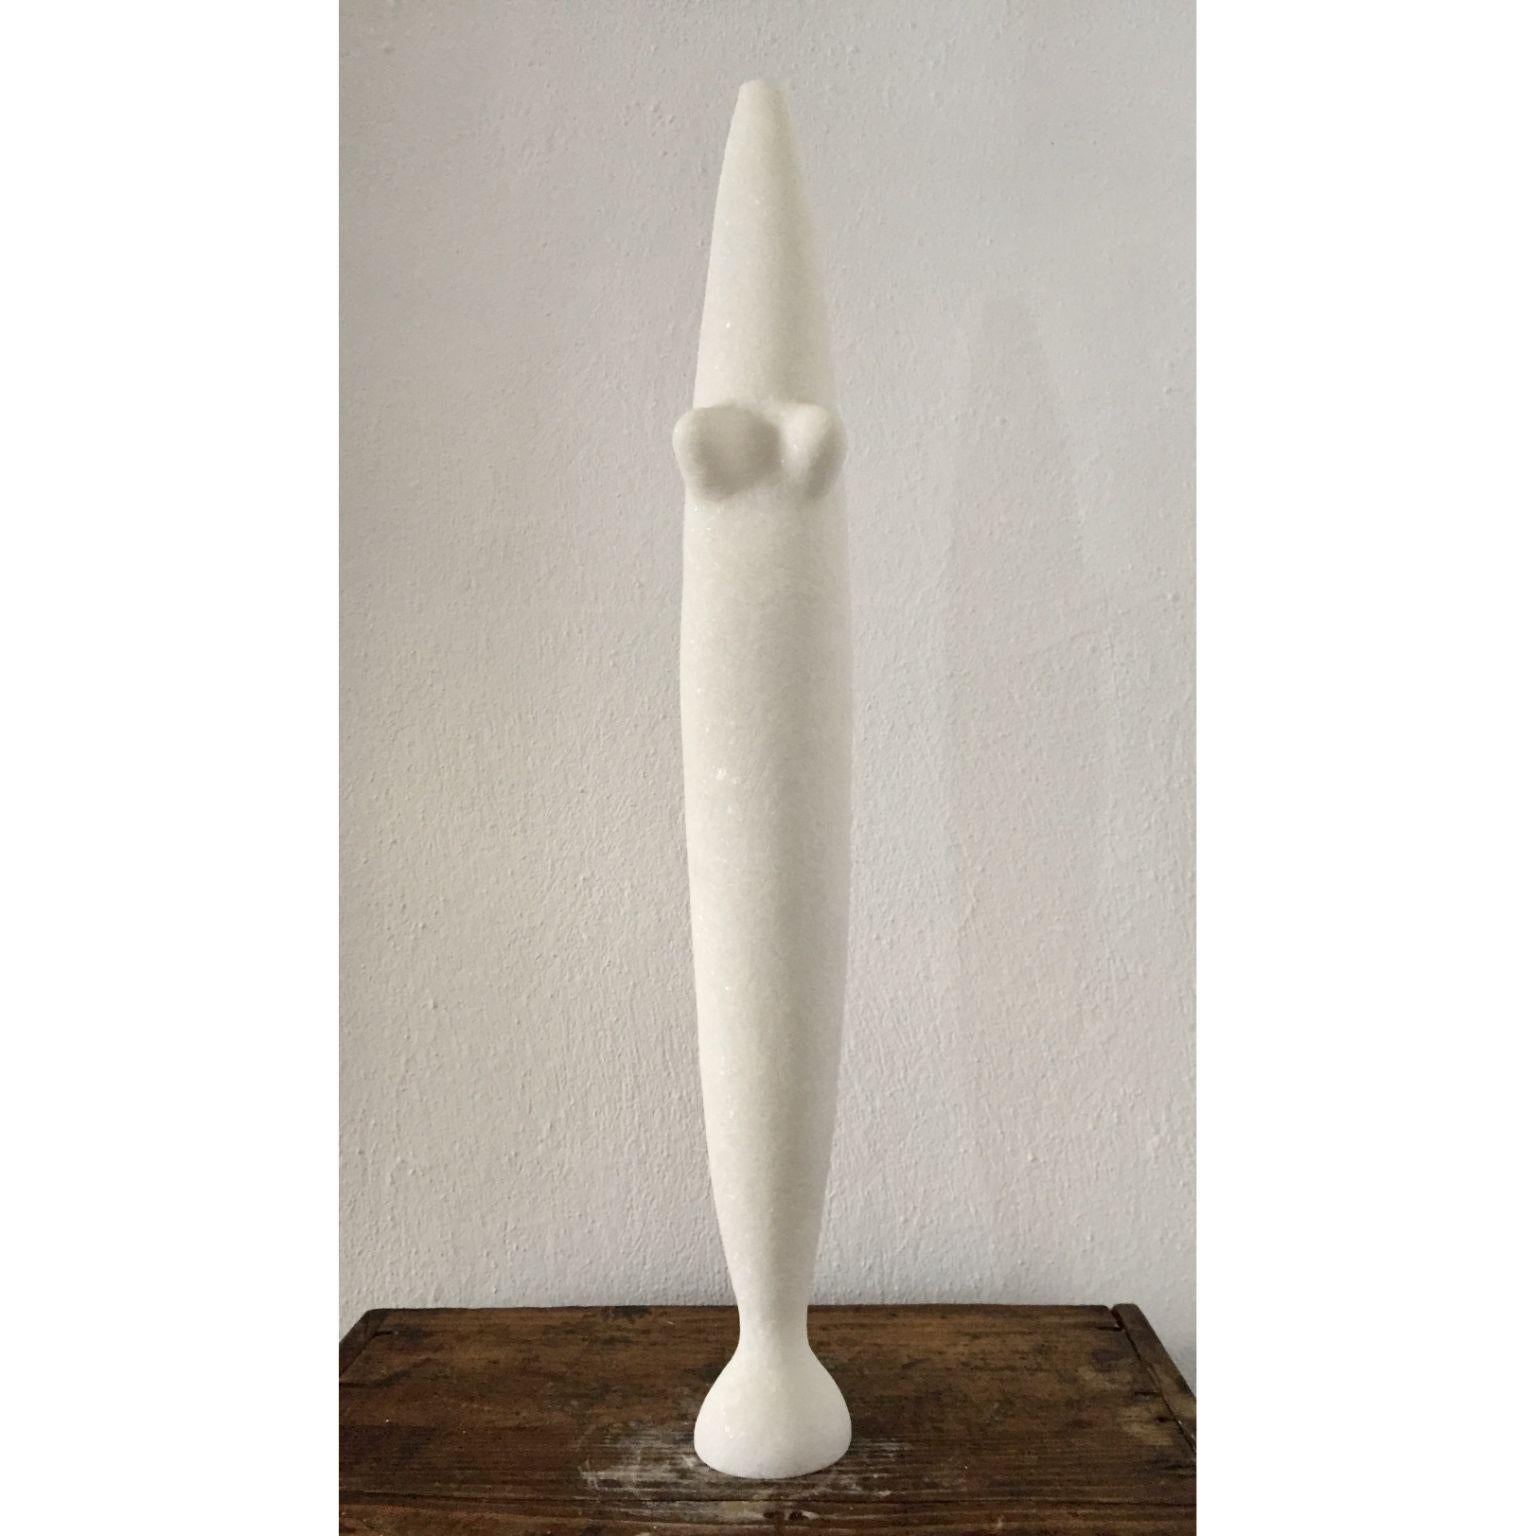 Aphrodite hand carved marble sculpture by Tom Von Kaenel
Dimensions: D 8 x H 60 cm
Materials: marble

Tom von Kaenel, sculptor and painter, was born in Switzerland in 1961. Already in his early
childhood he was deeply devoted to art. His desire